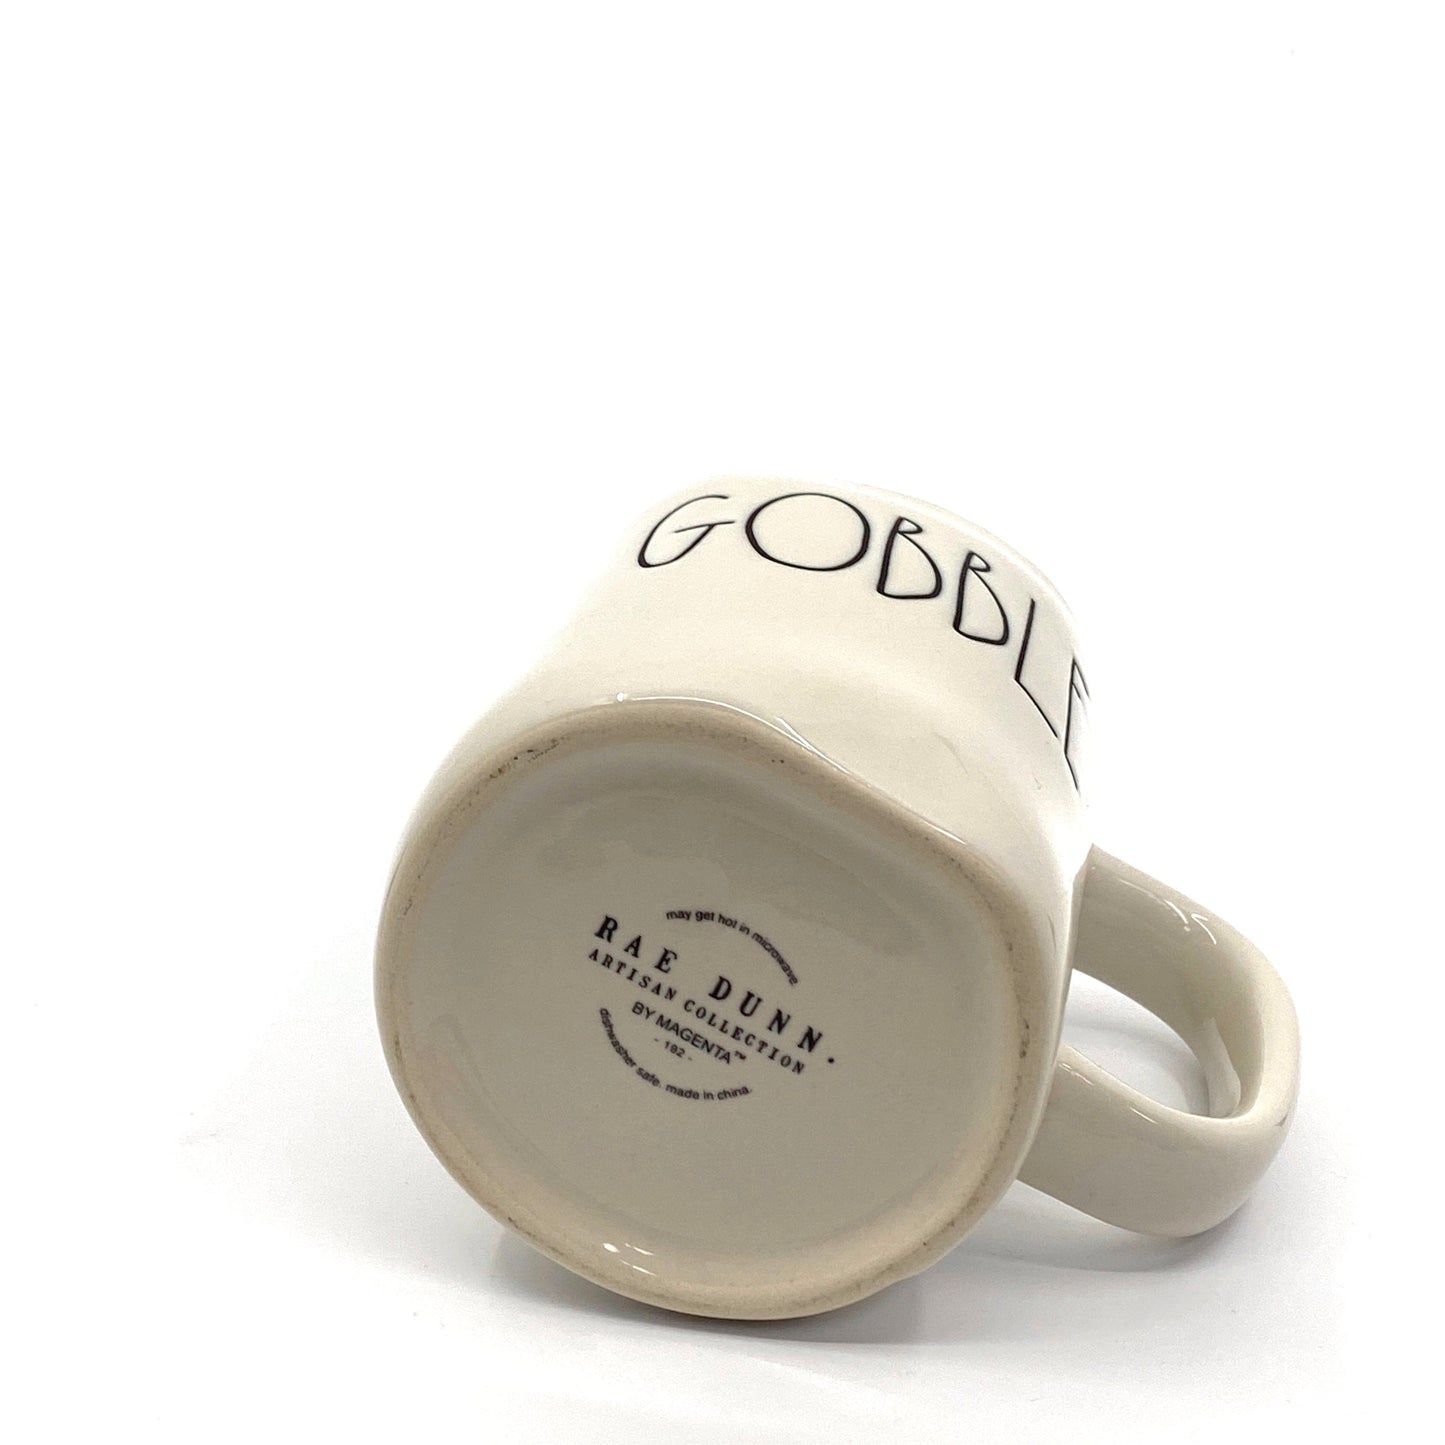 Rae Dunn Artisan Collection ‘GOBBLE’ Large Letter White Coffee Cup Mug By Magenta